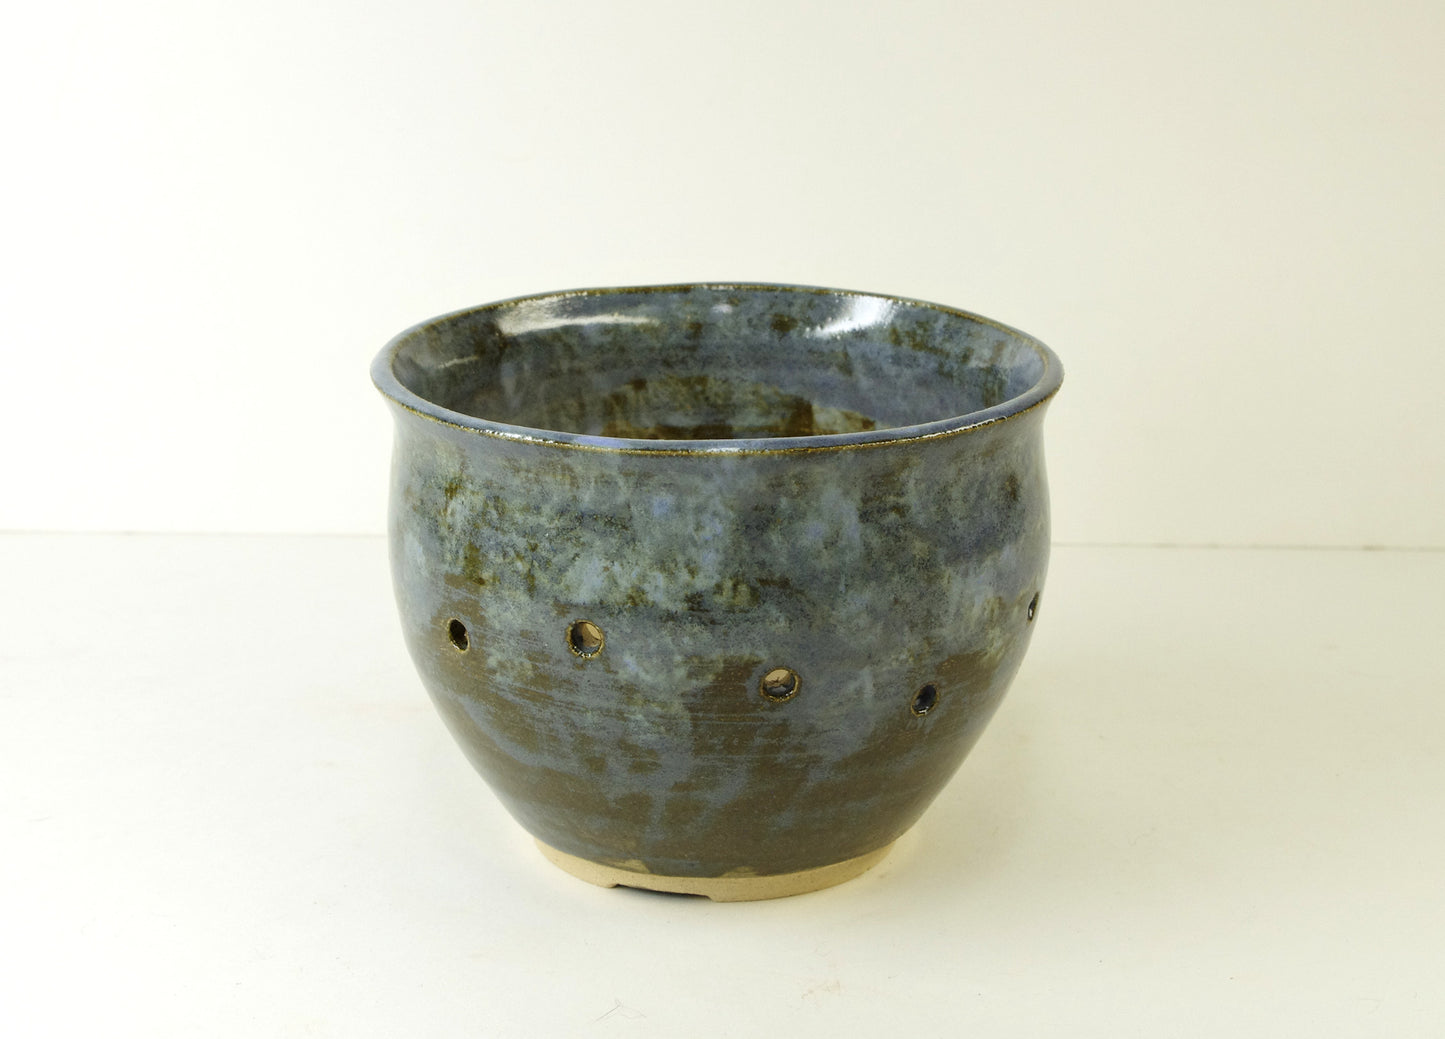 2038, Hand Thrown Stoneware Orchid Pot, Blues, Greenish Browns, 4 5/8 x 3 1/2